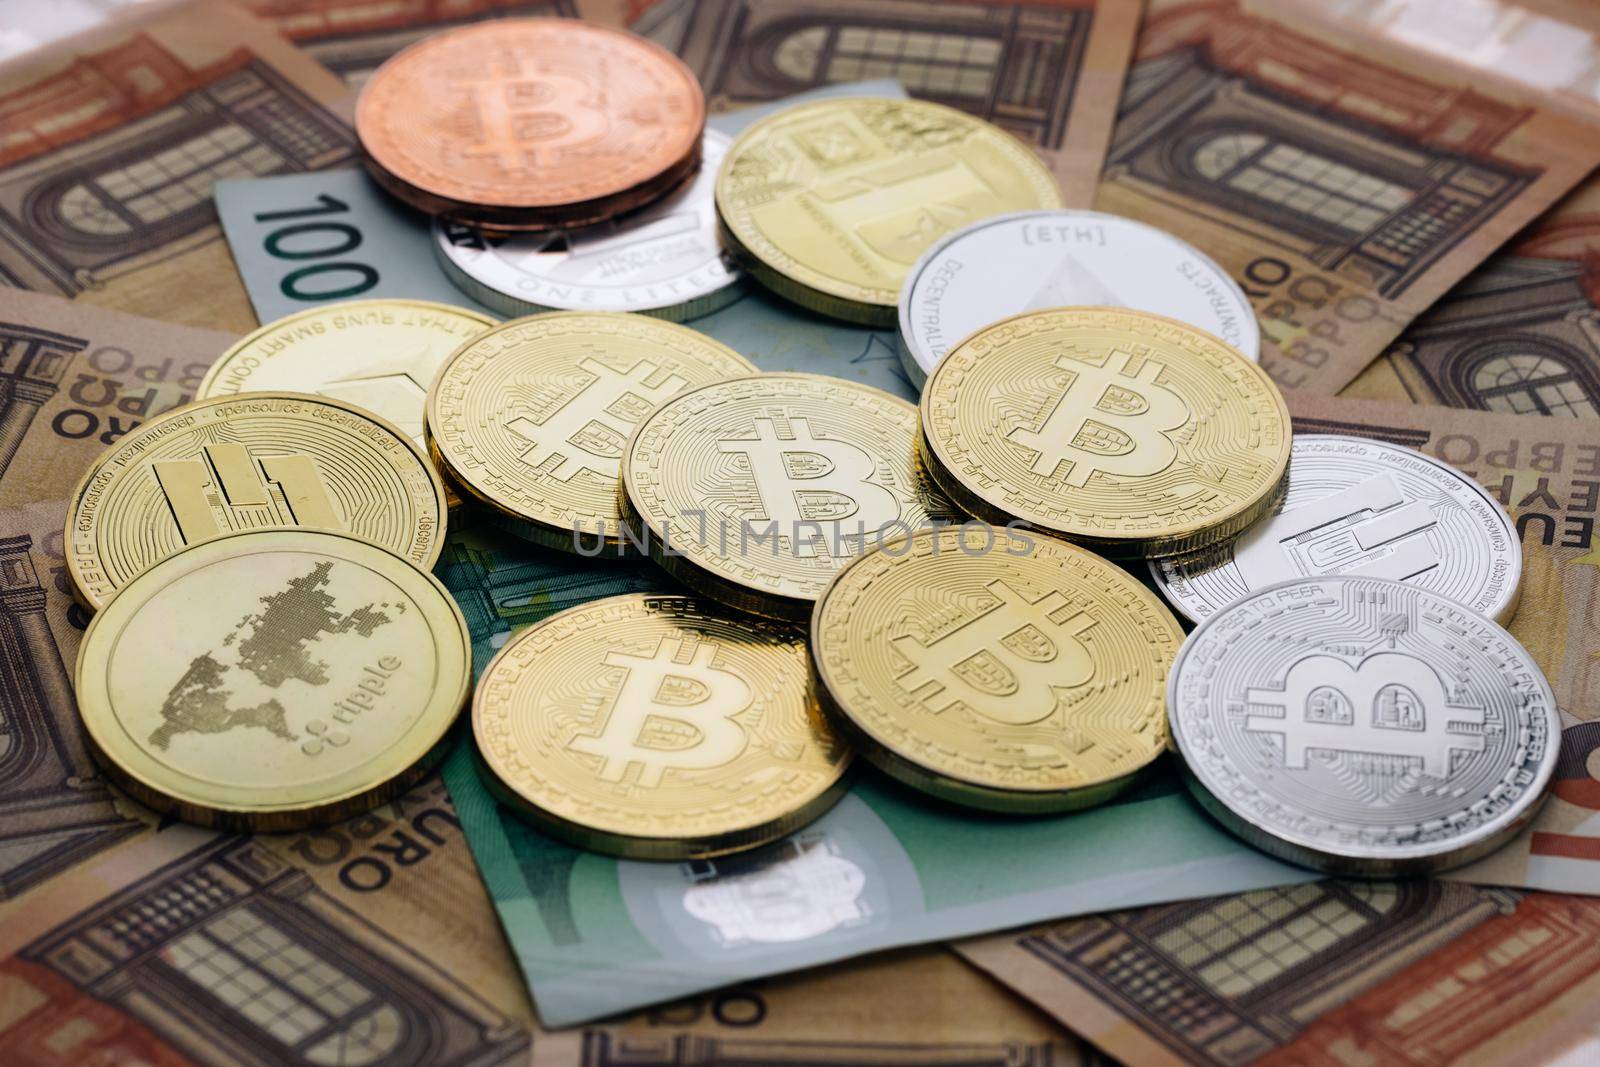 BitCoin BTC, Ethereum ETH and Litecoin LTC coins. Digital coin money on euro banknotes. Crypto currency, quotes online concept, stock exchange, exchange market